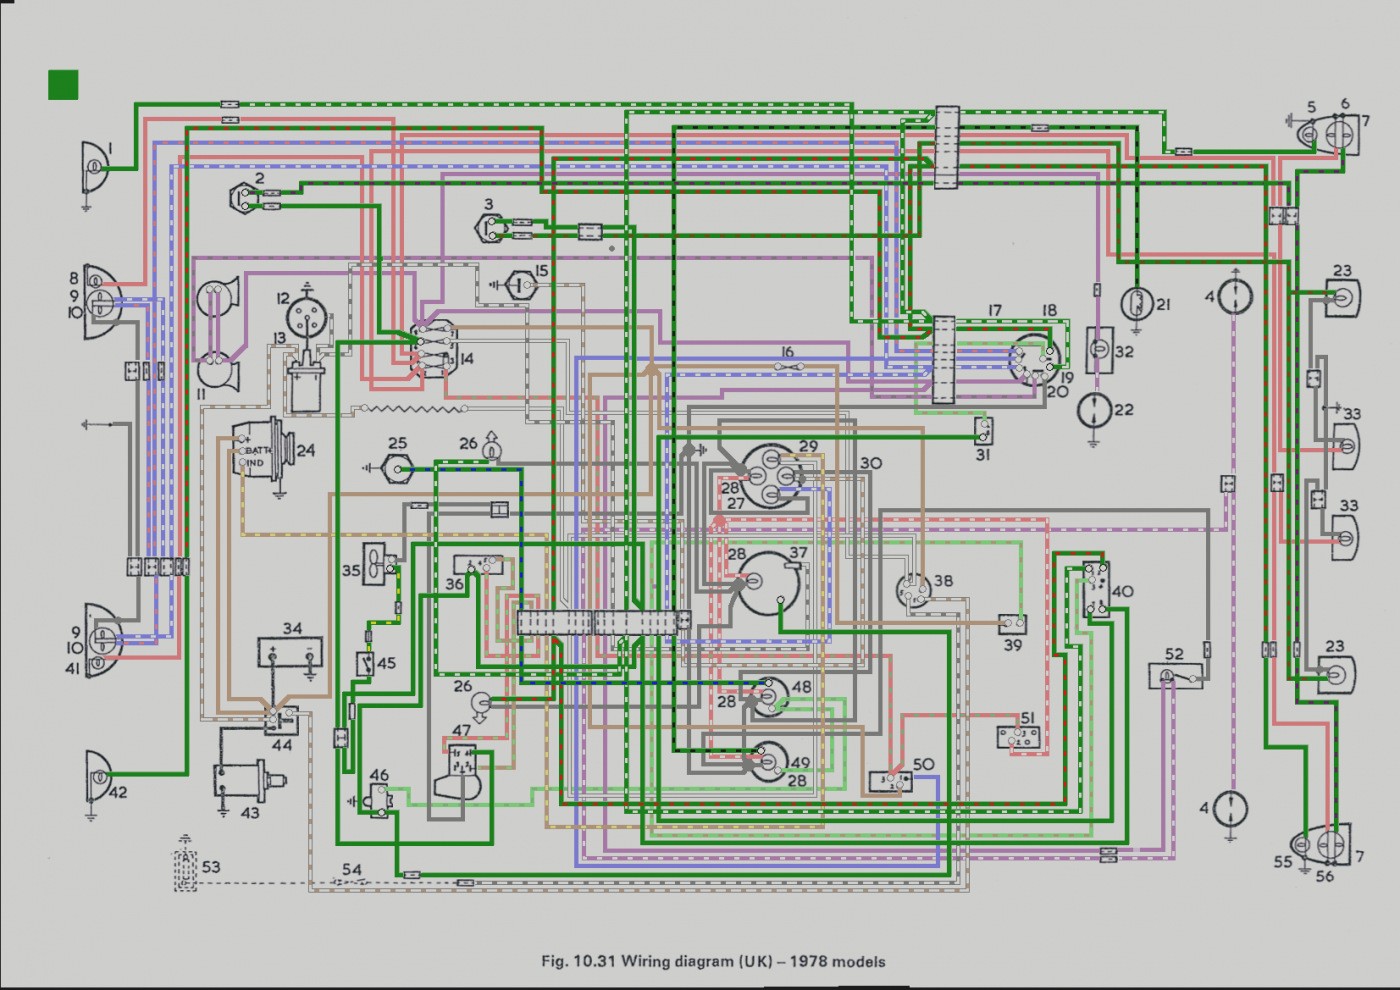 Outstanding Mgc Wiring Schematic Electrical Circuit Diagram Dorable 1978 Mg Mgb Wiring Diagram Illustration Electrical